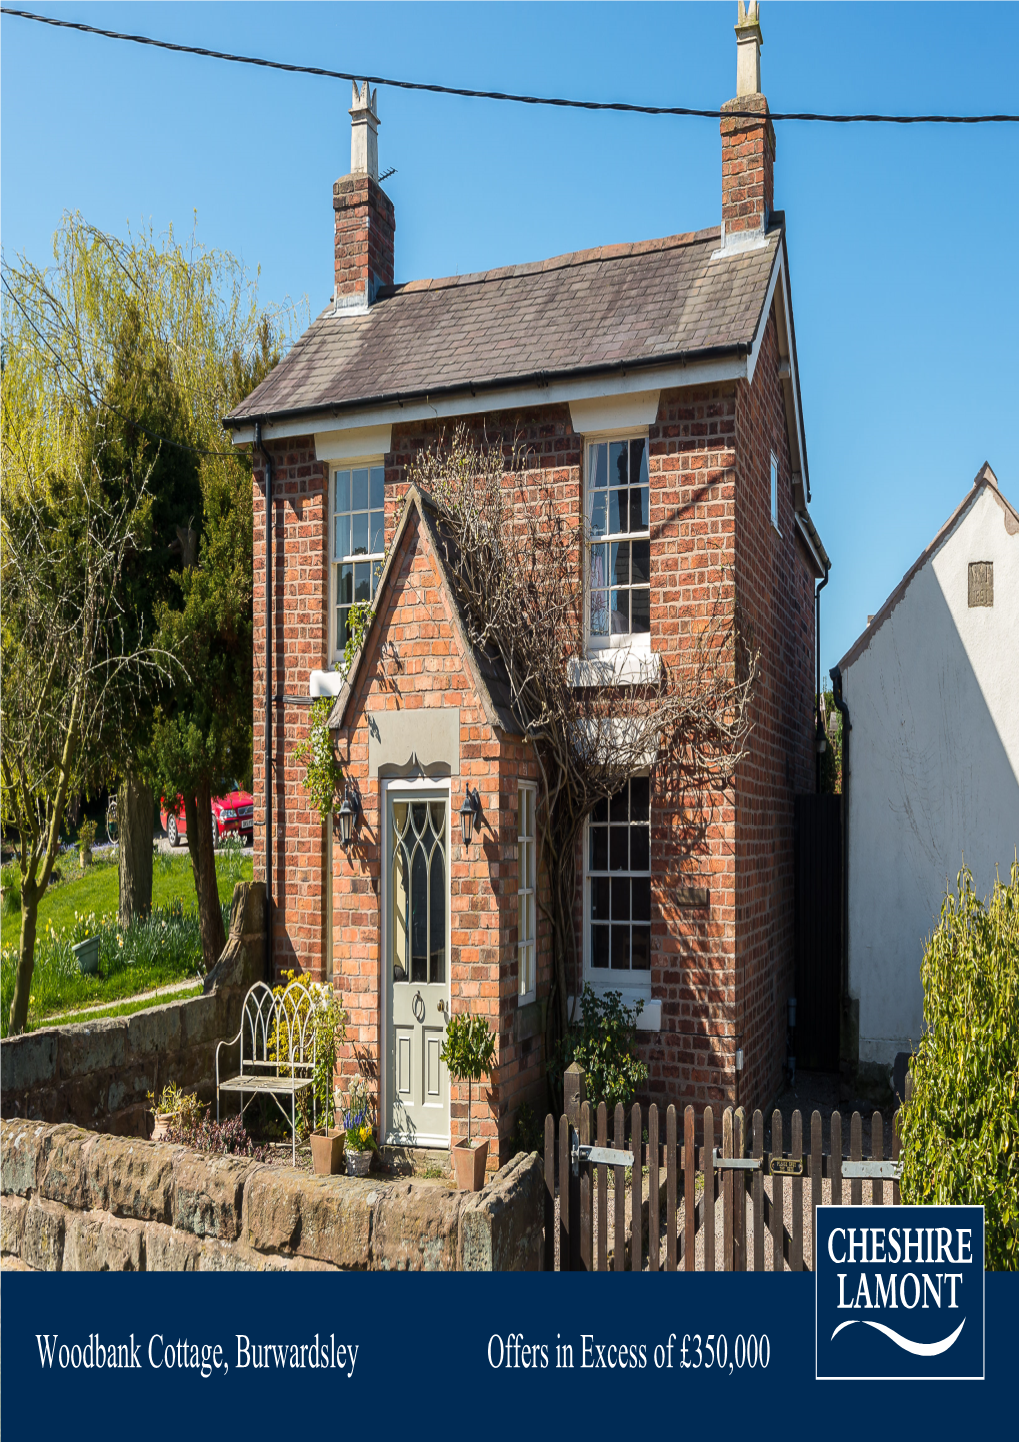 Woodbank Cottage, Burwardsley Offers in Excess of £350,000